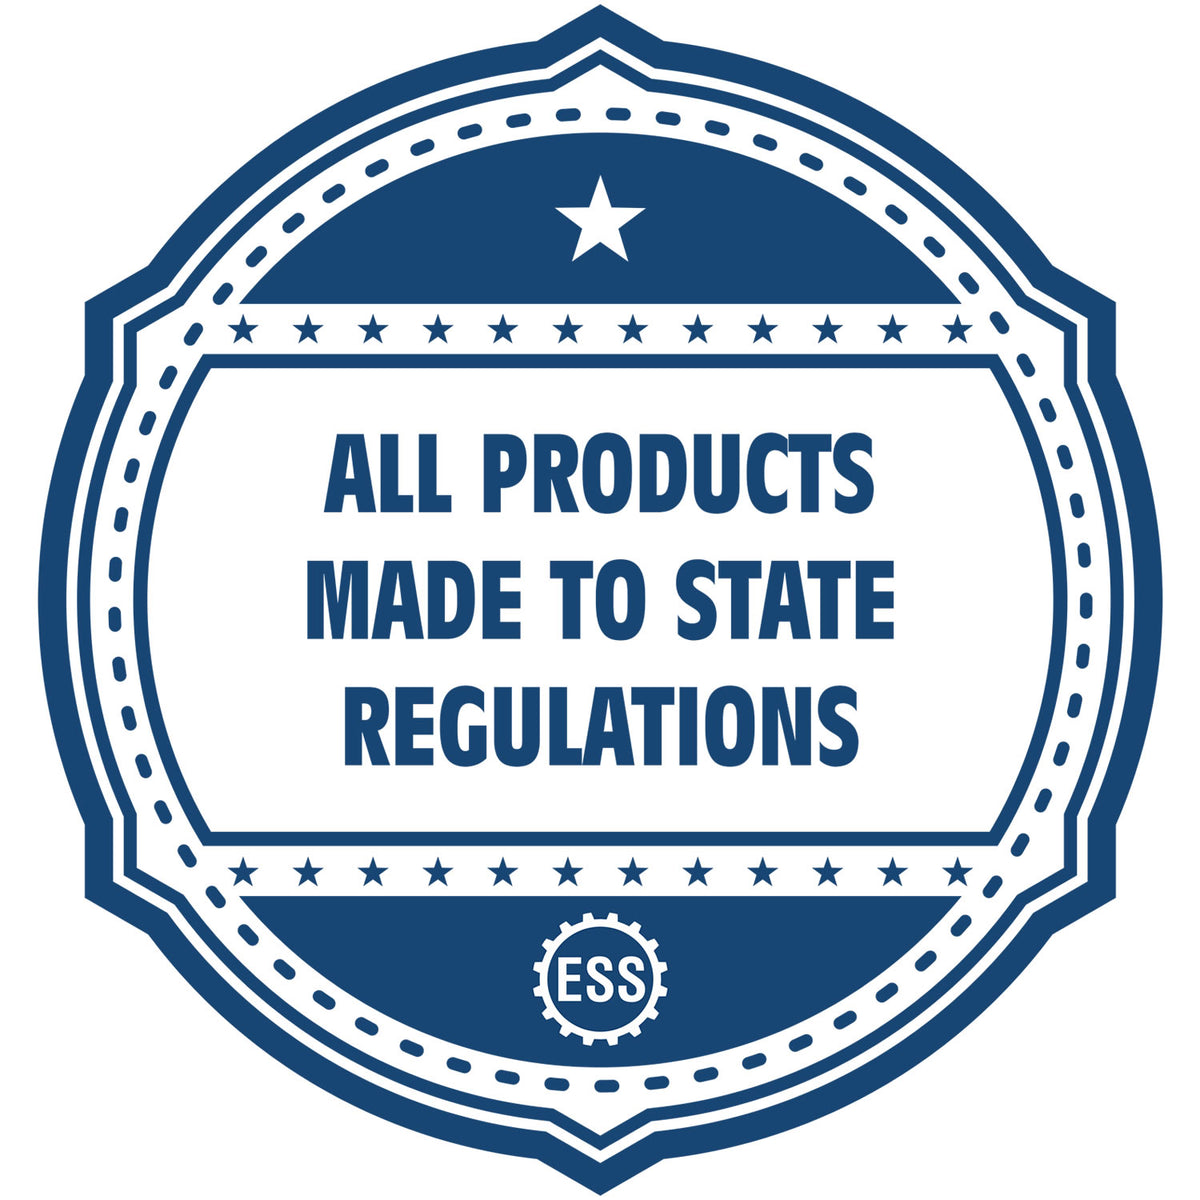 A blue icon or badge for the Hybrid Kentucky Engineer Seal showing that this product is made in compliance with state regulations.